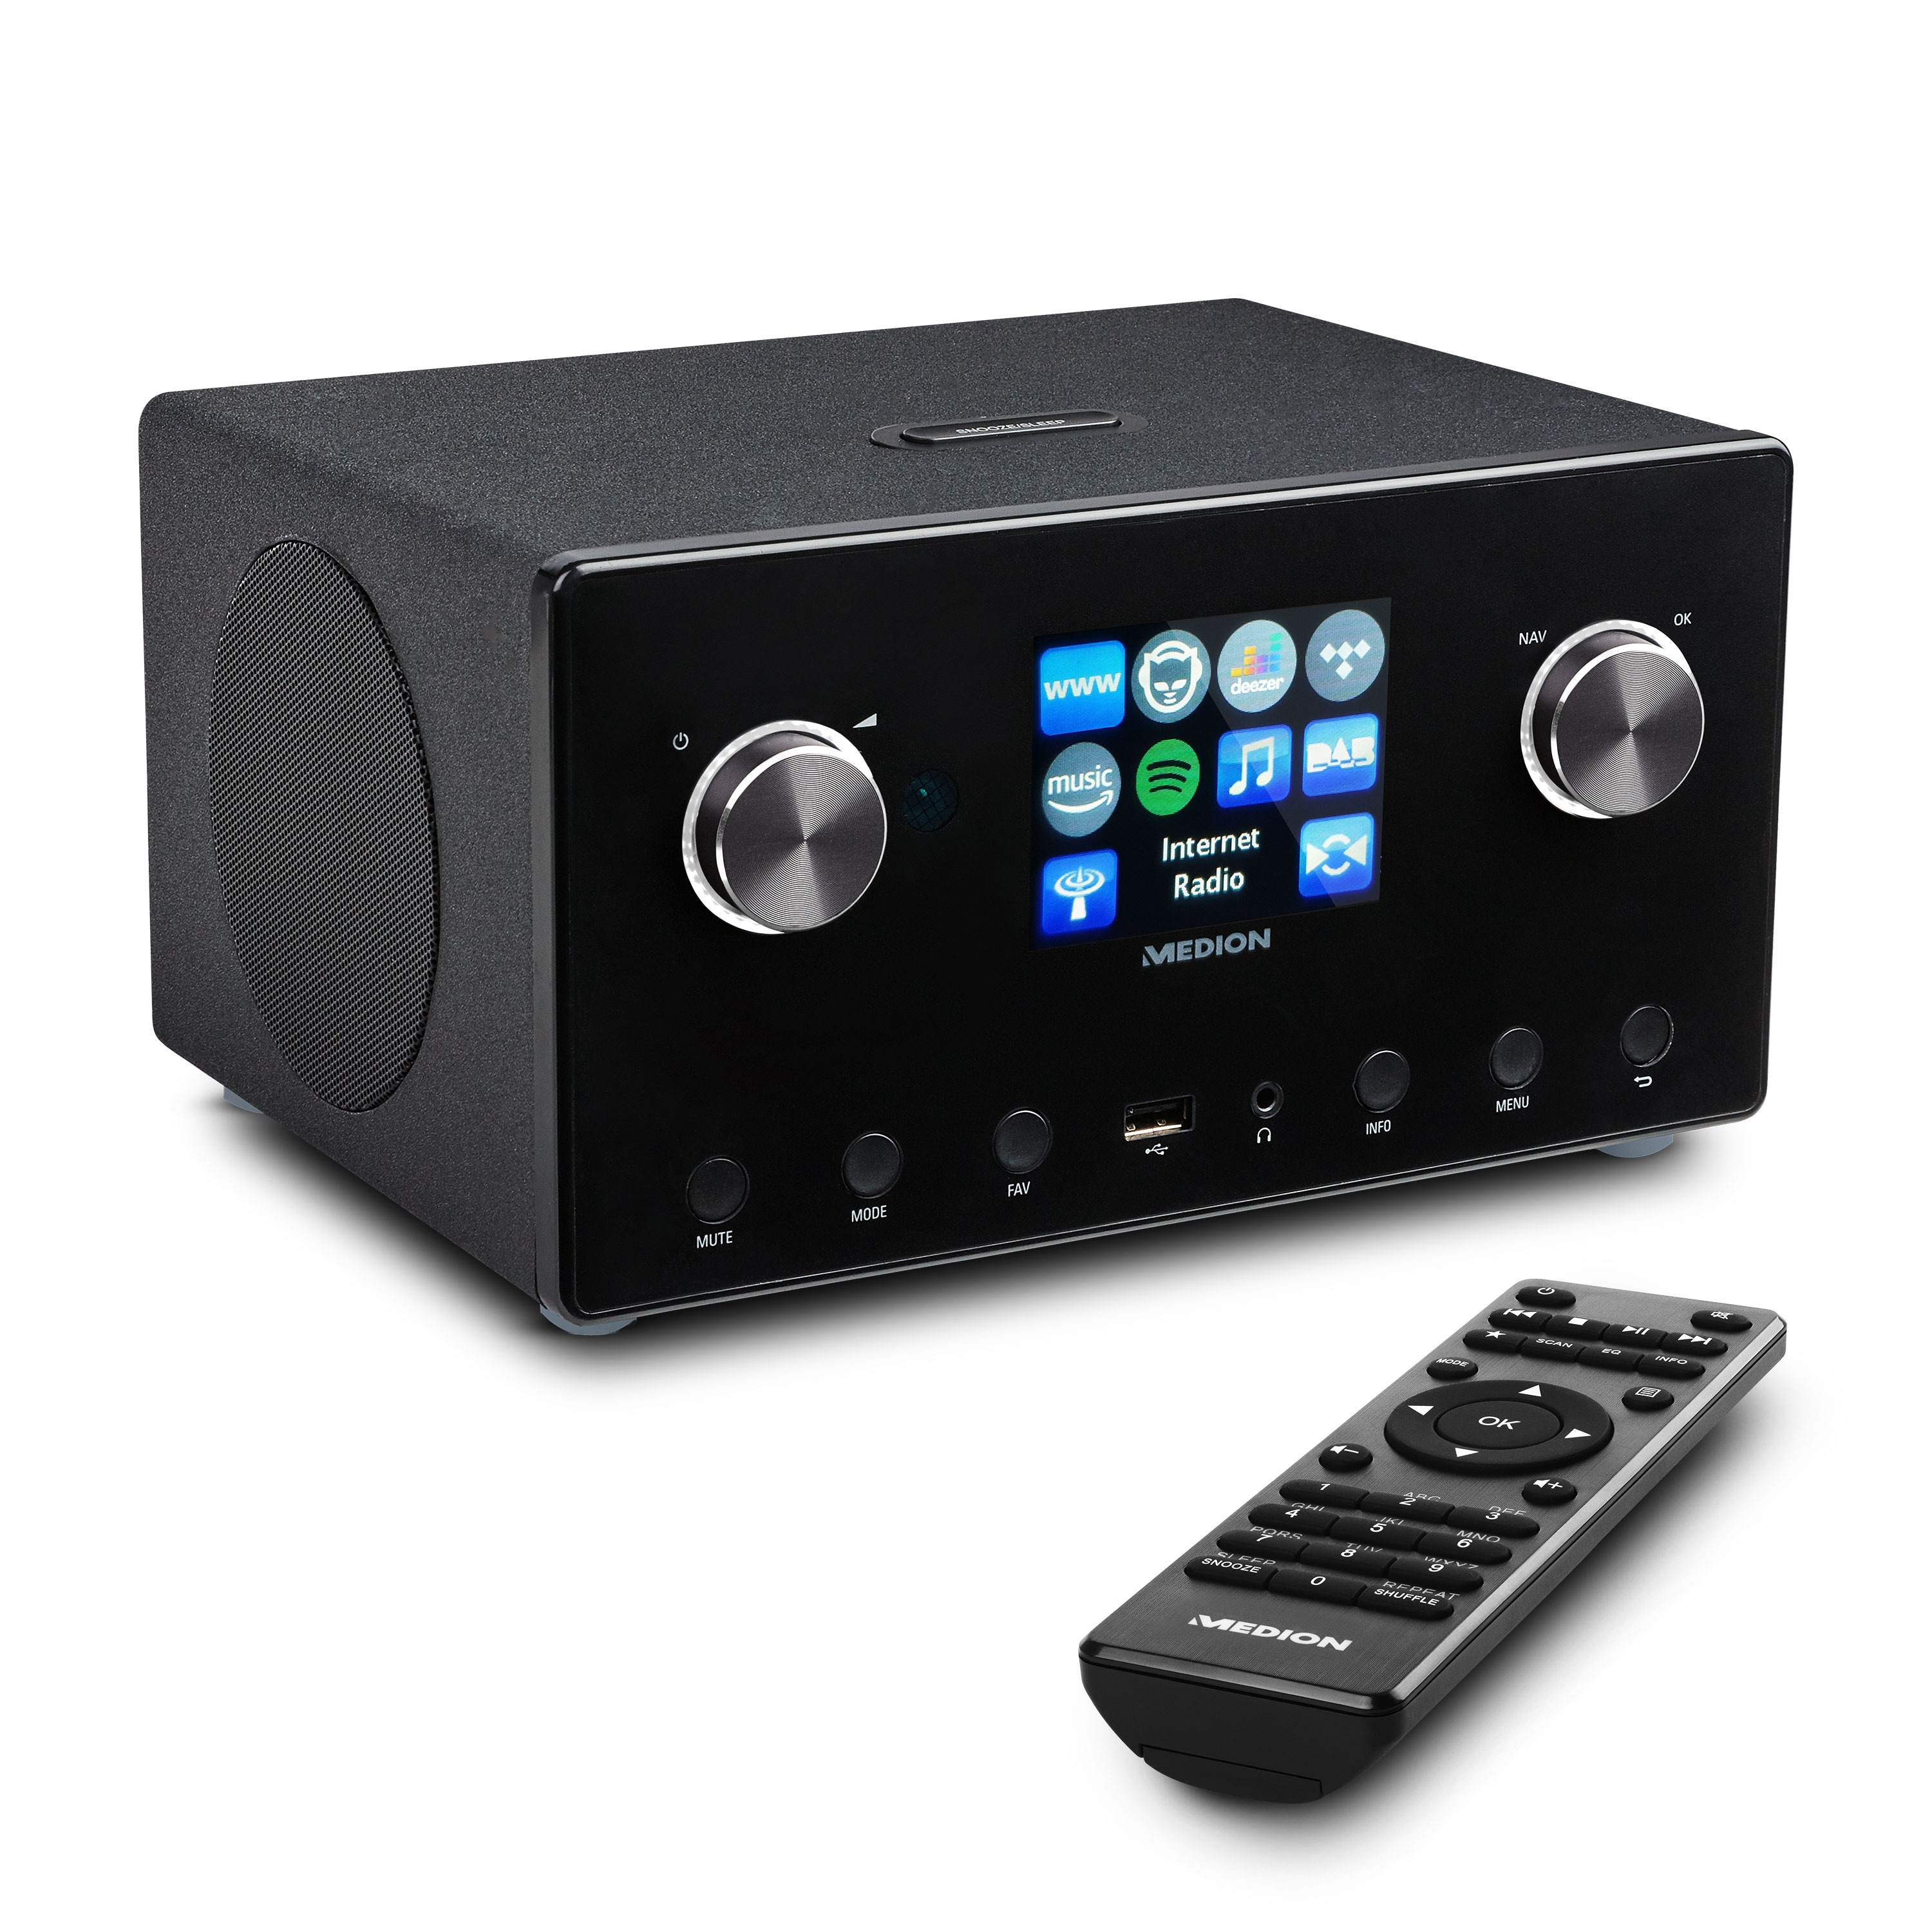 MEDION® LIFE® P85295 Stereo Internetradio, großes 8,1 cm (3,2“) TFT-Display, DAB+ & UKW, Spotify®-Connect, DLNA, USB, WLAN, LAN, integrierter Subwoofer, 2 x 7,5 W + 1 x 15 W (RMS)